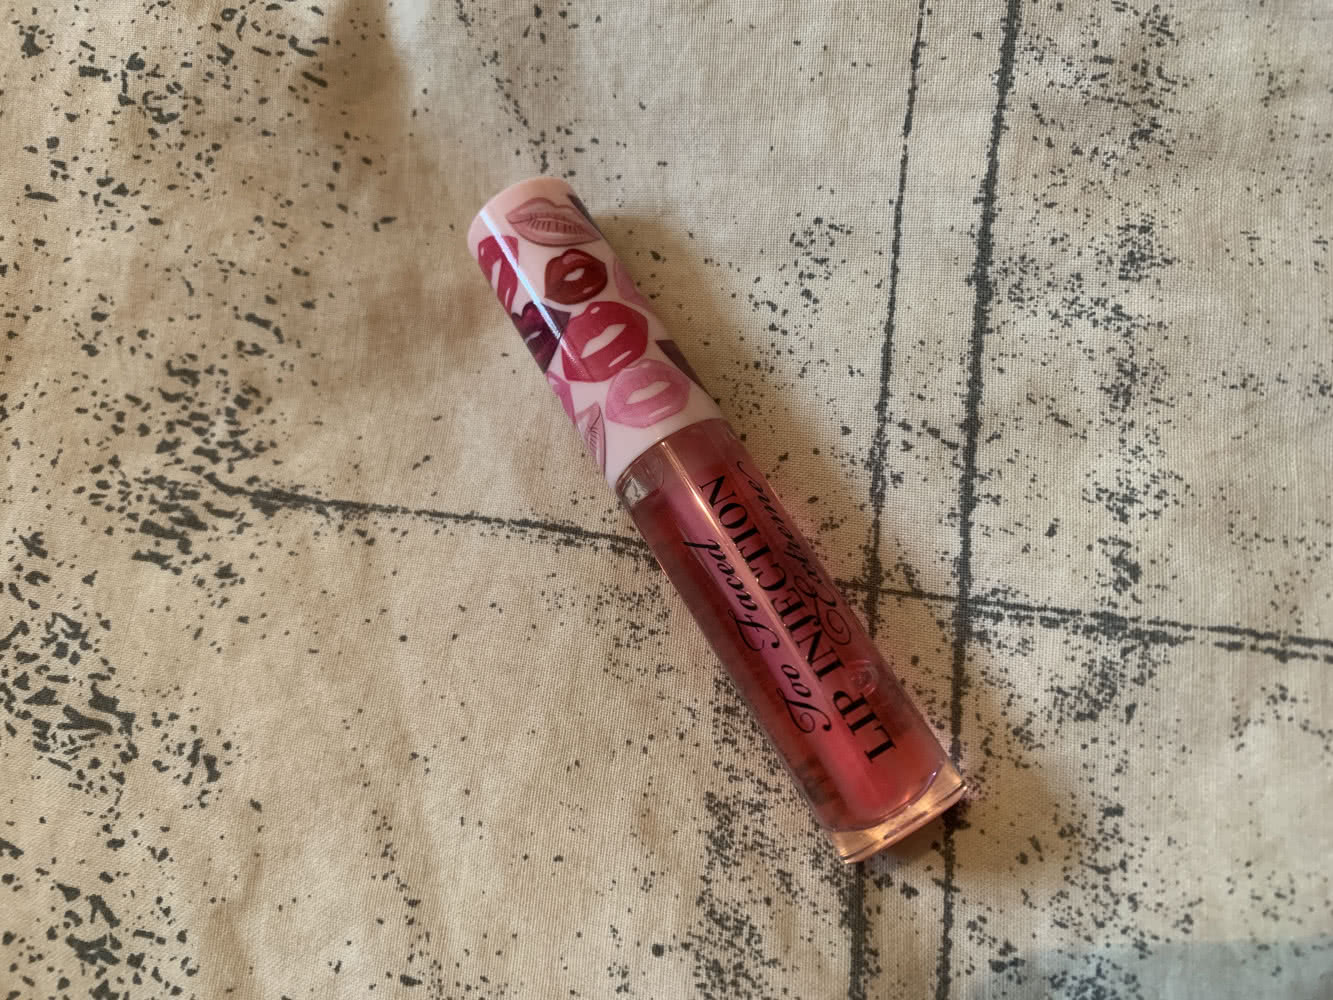 Too Faced, Lip Injection Extreme, 2,8g, Bubblegum Yum